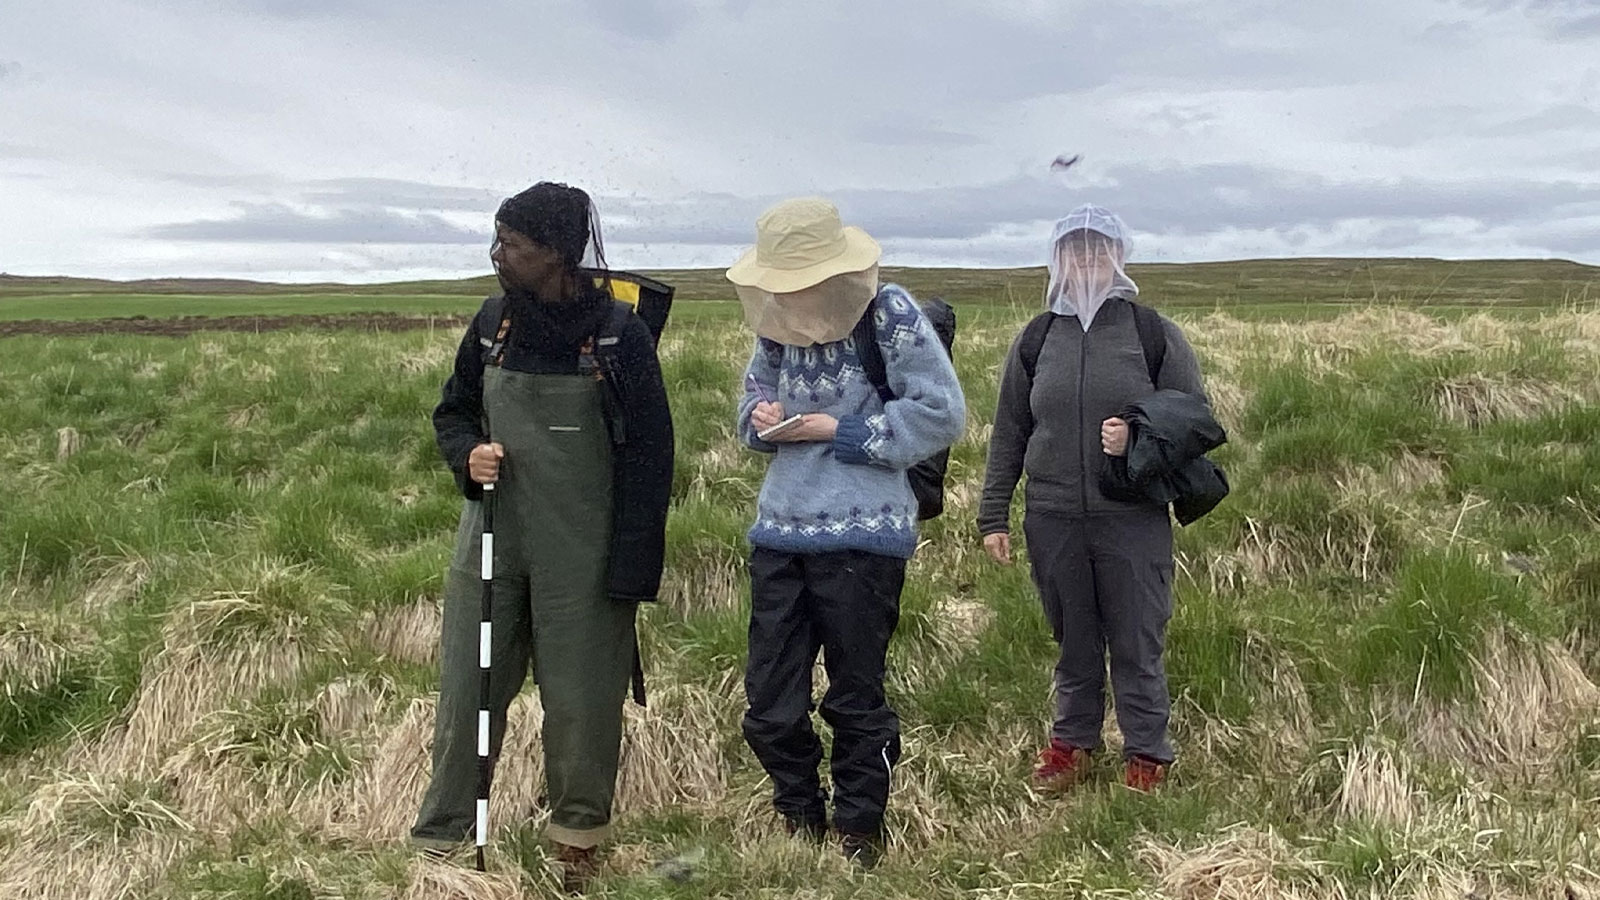 Hunter Anthropology MA students and faculty doing fieldwork in Northern Iceland.